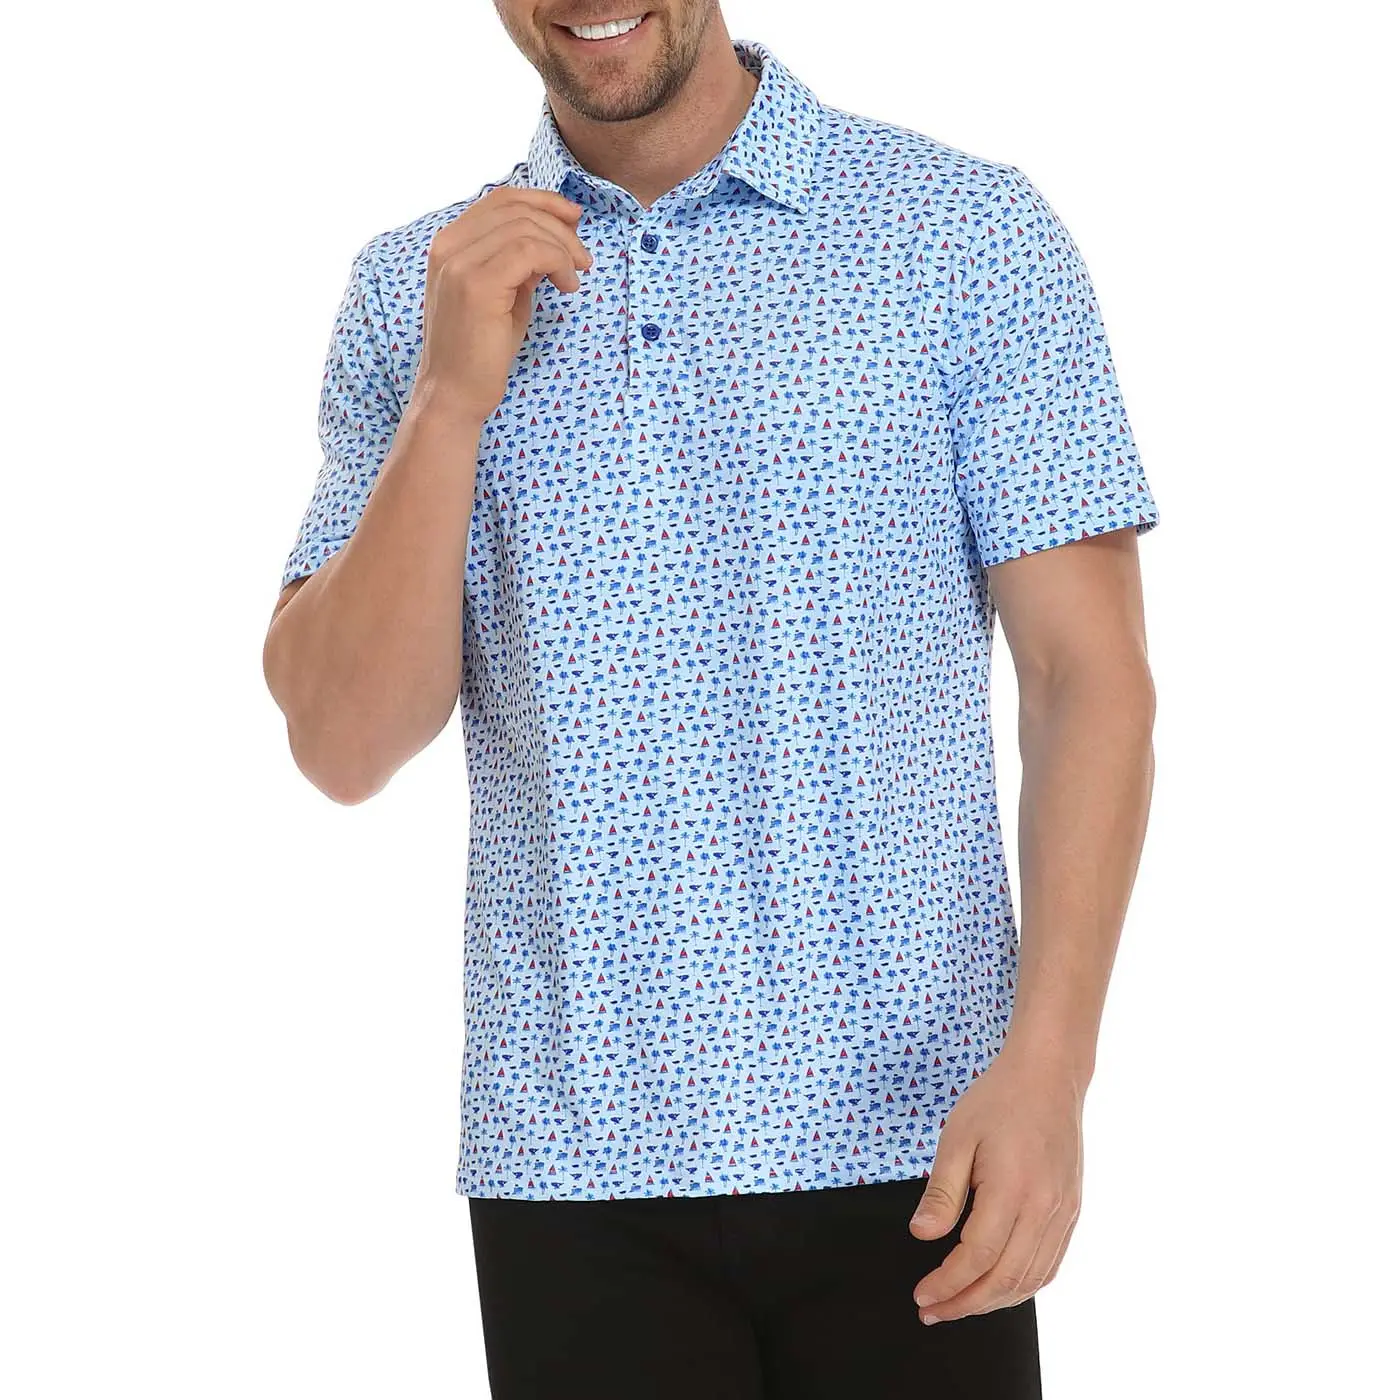 Pattern Golf Polo for Men High Quality Moisture Wicking Polyester and Spandex Golf Clothes 4-Way Stretch Men's Shirts